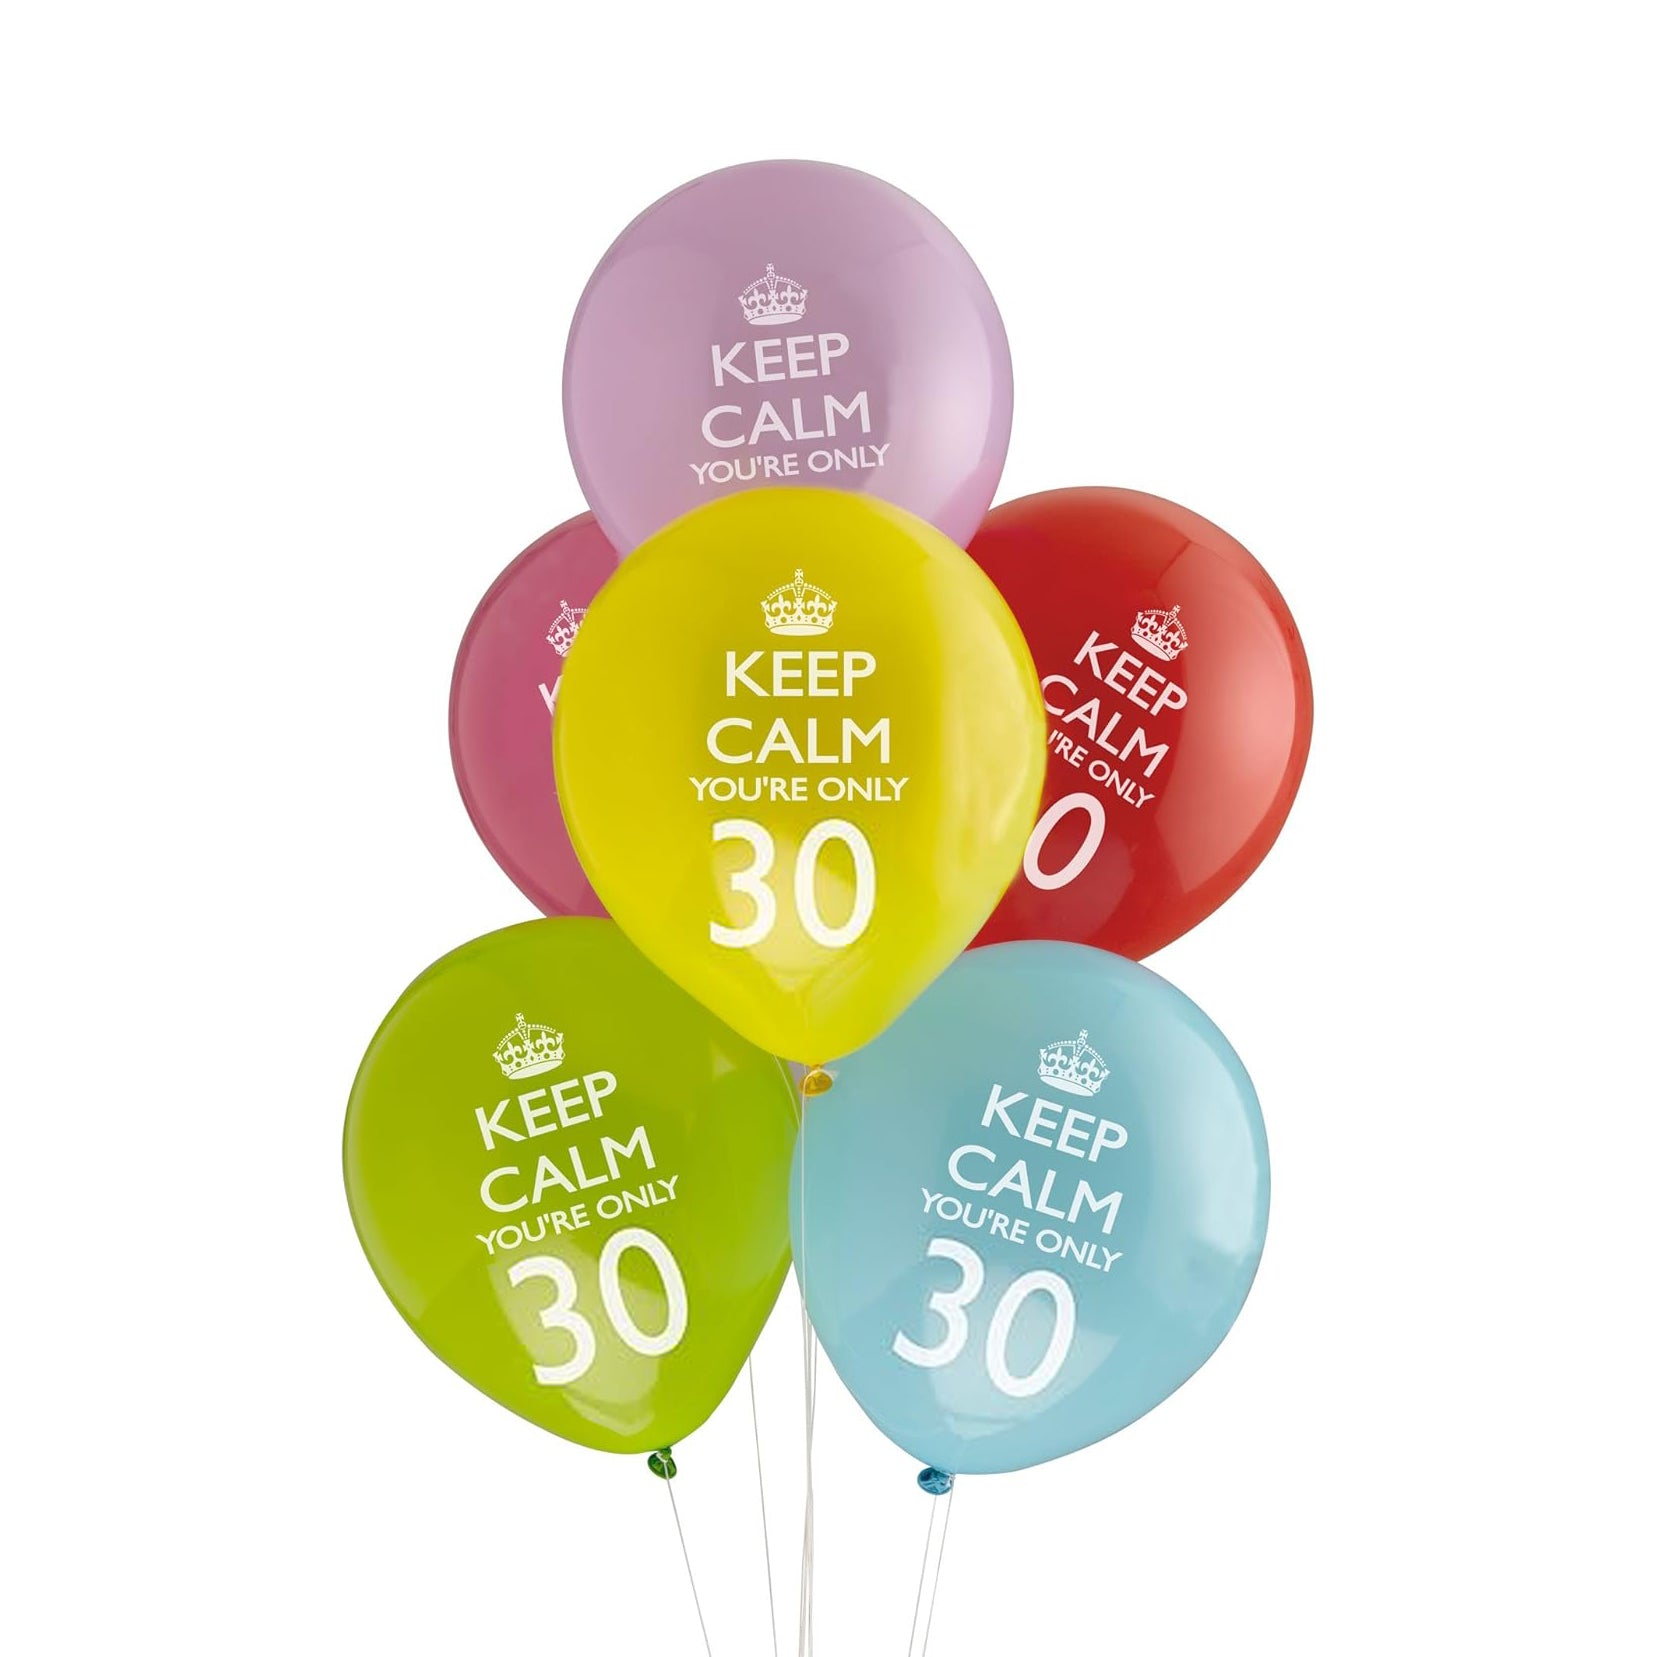 Keep Calm You're Only 30 Balloons - Pack of 8